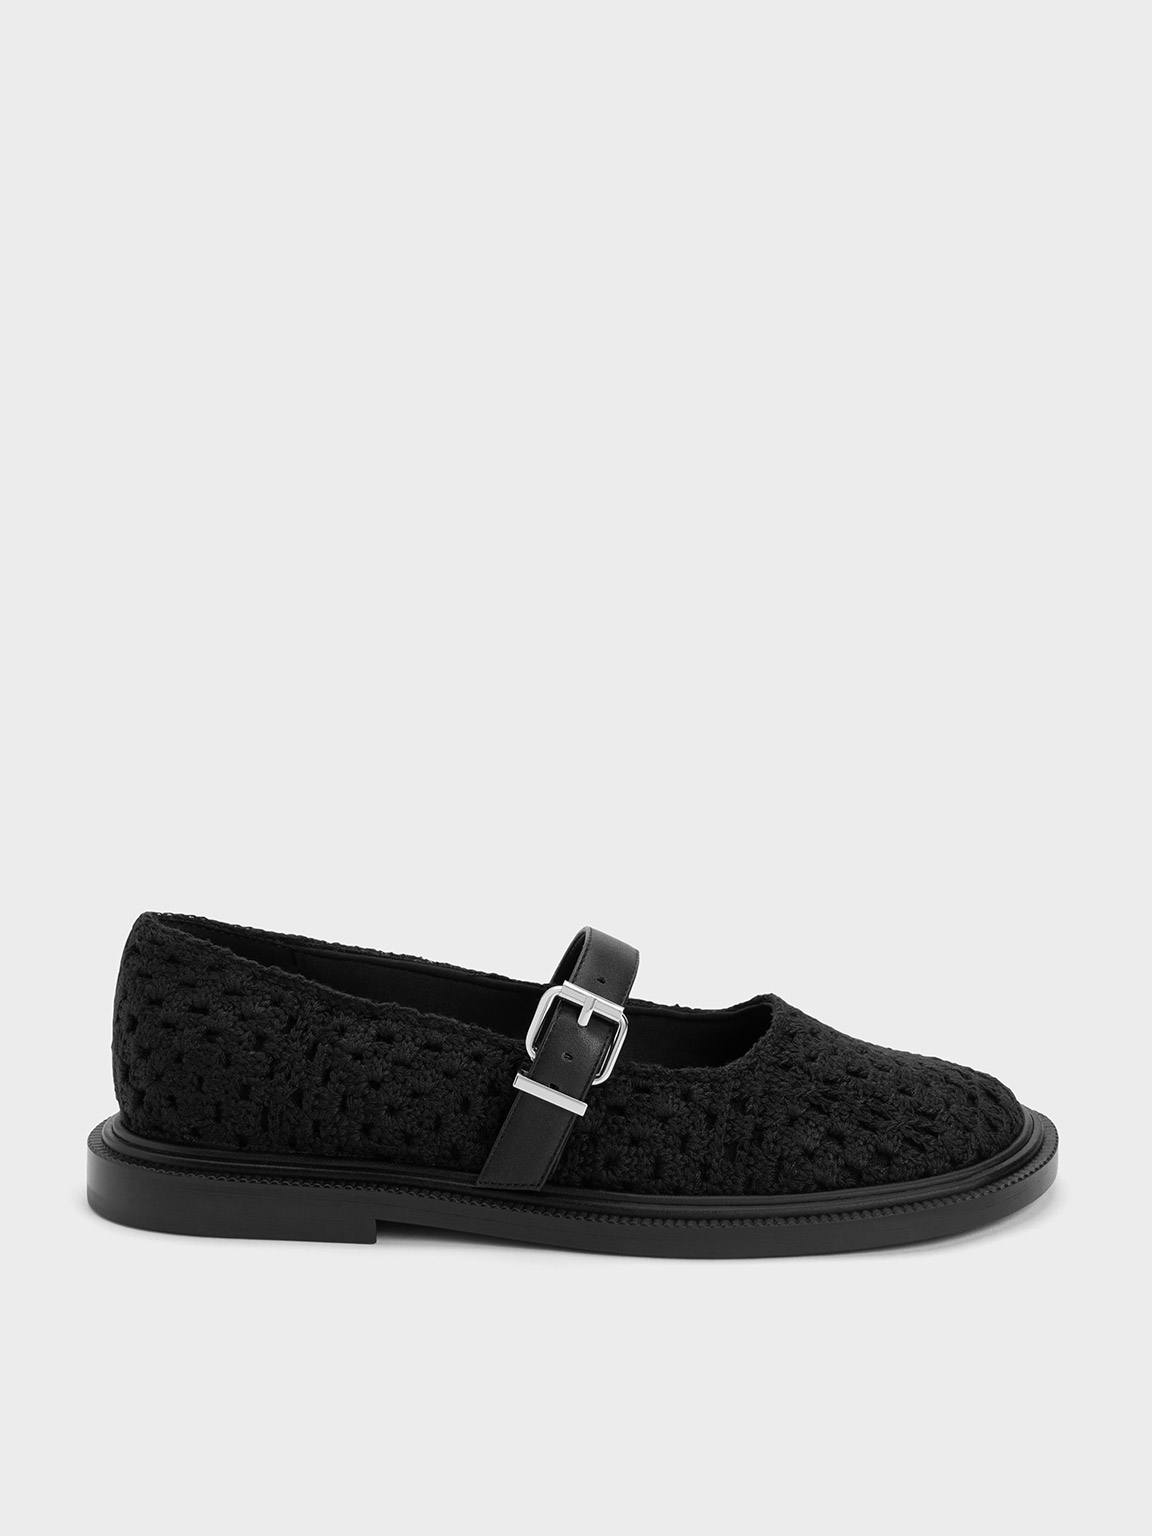 Black Crochet & Leather Mary Janes - CHARLES & KEITH UK